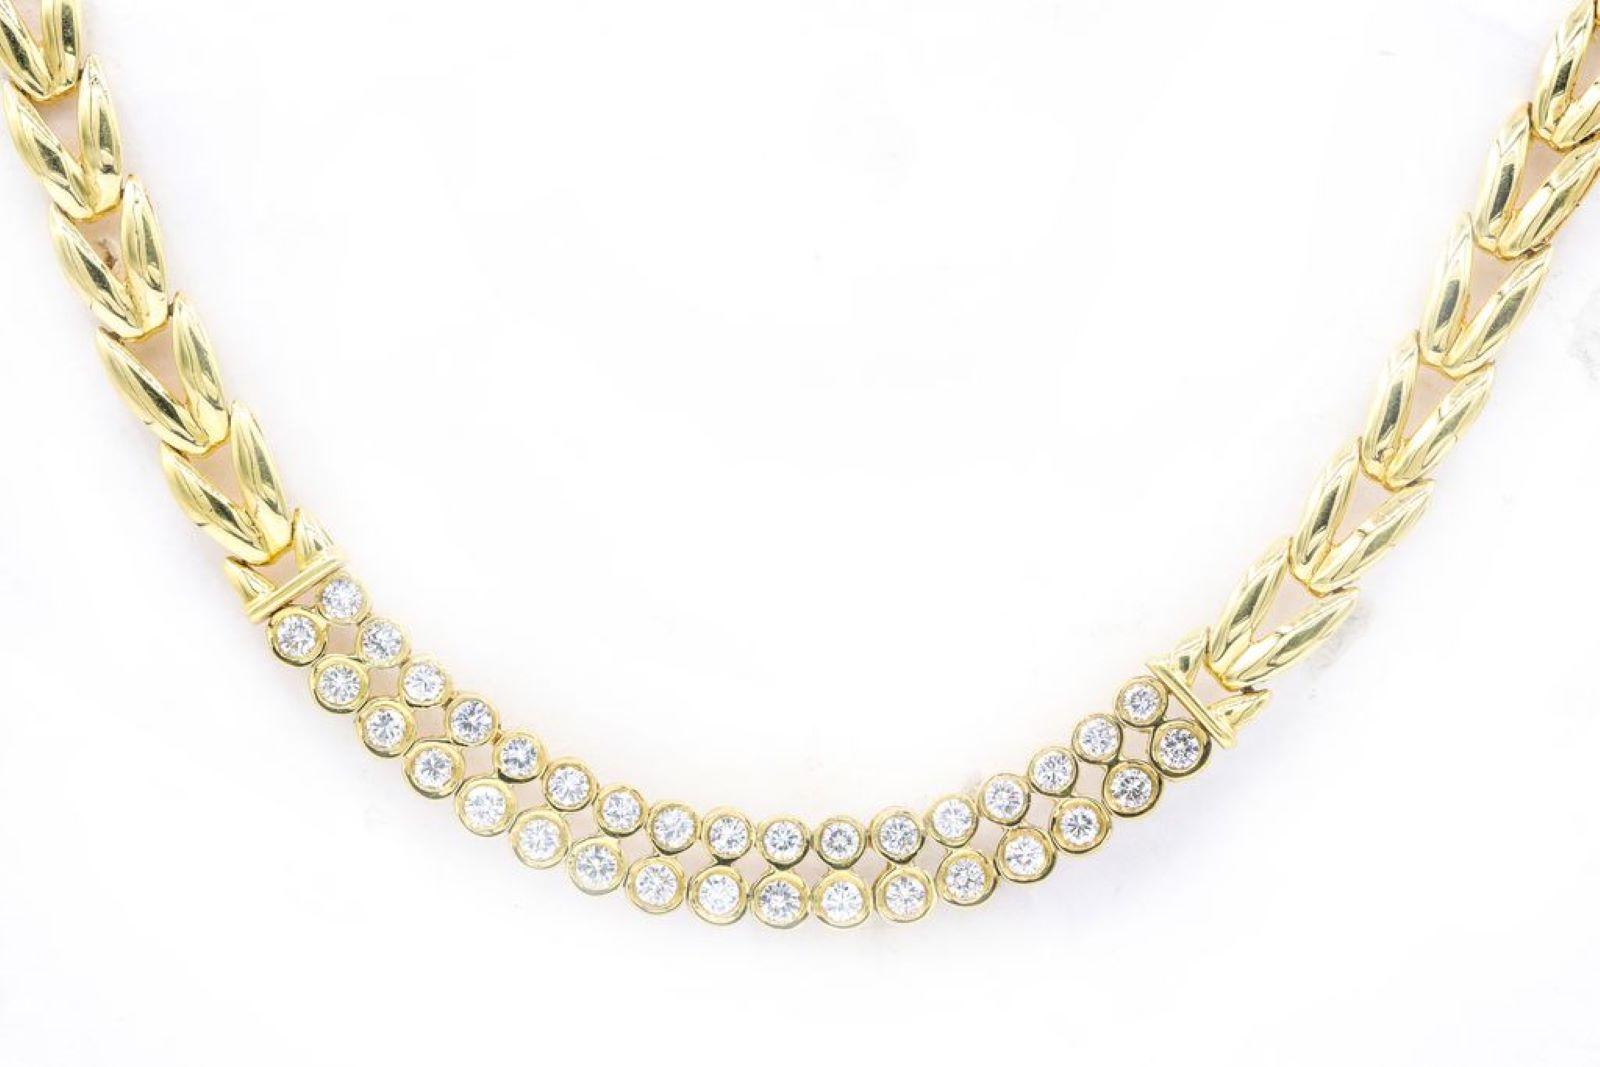 Round Cut Diana M 2.05cts Diamond Choker Necklace in 14kt Yellow Gold For Sale